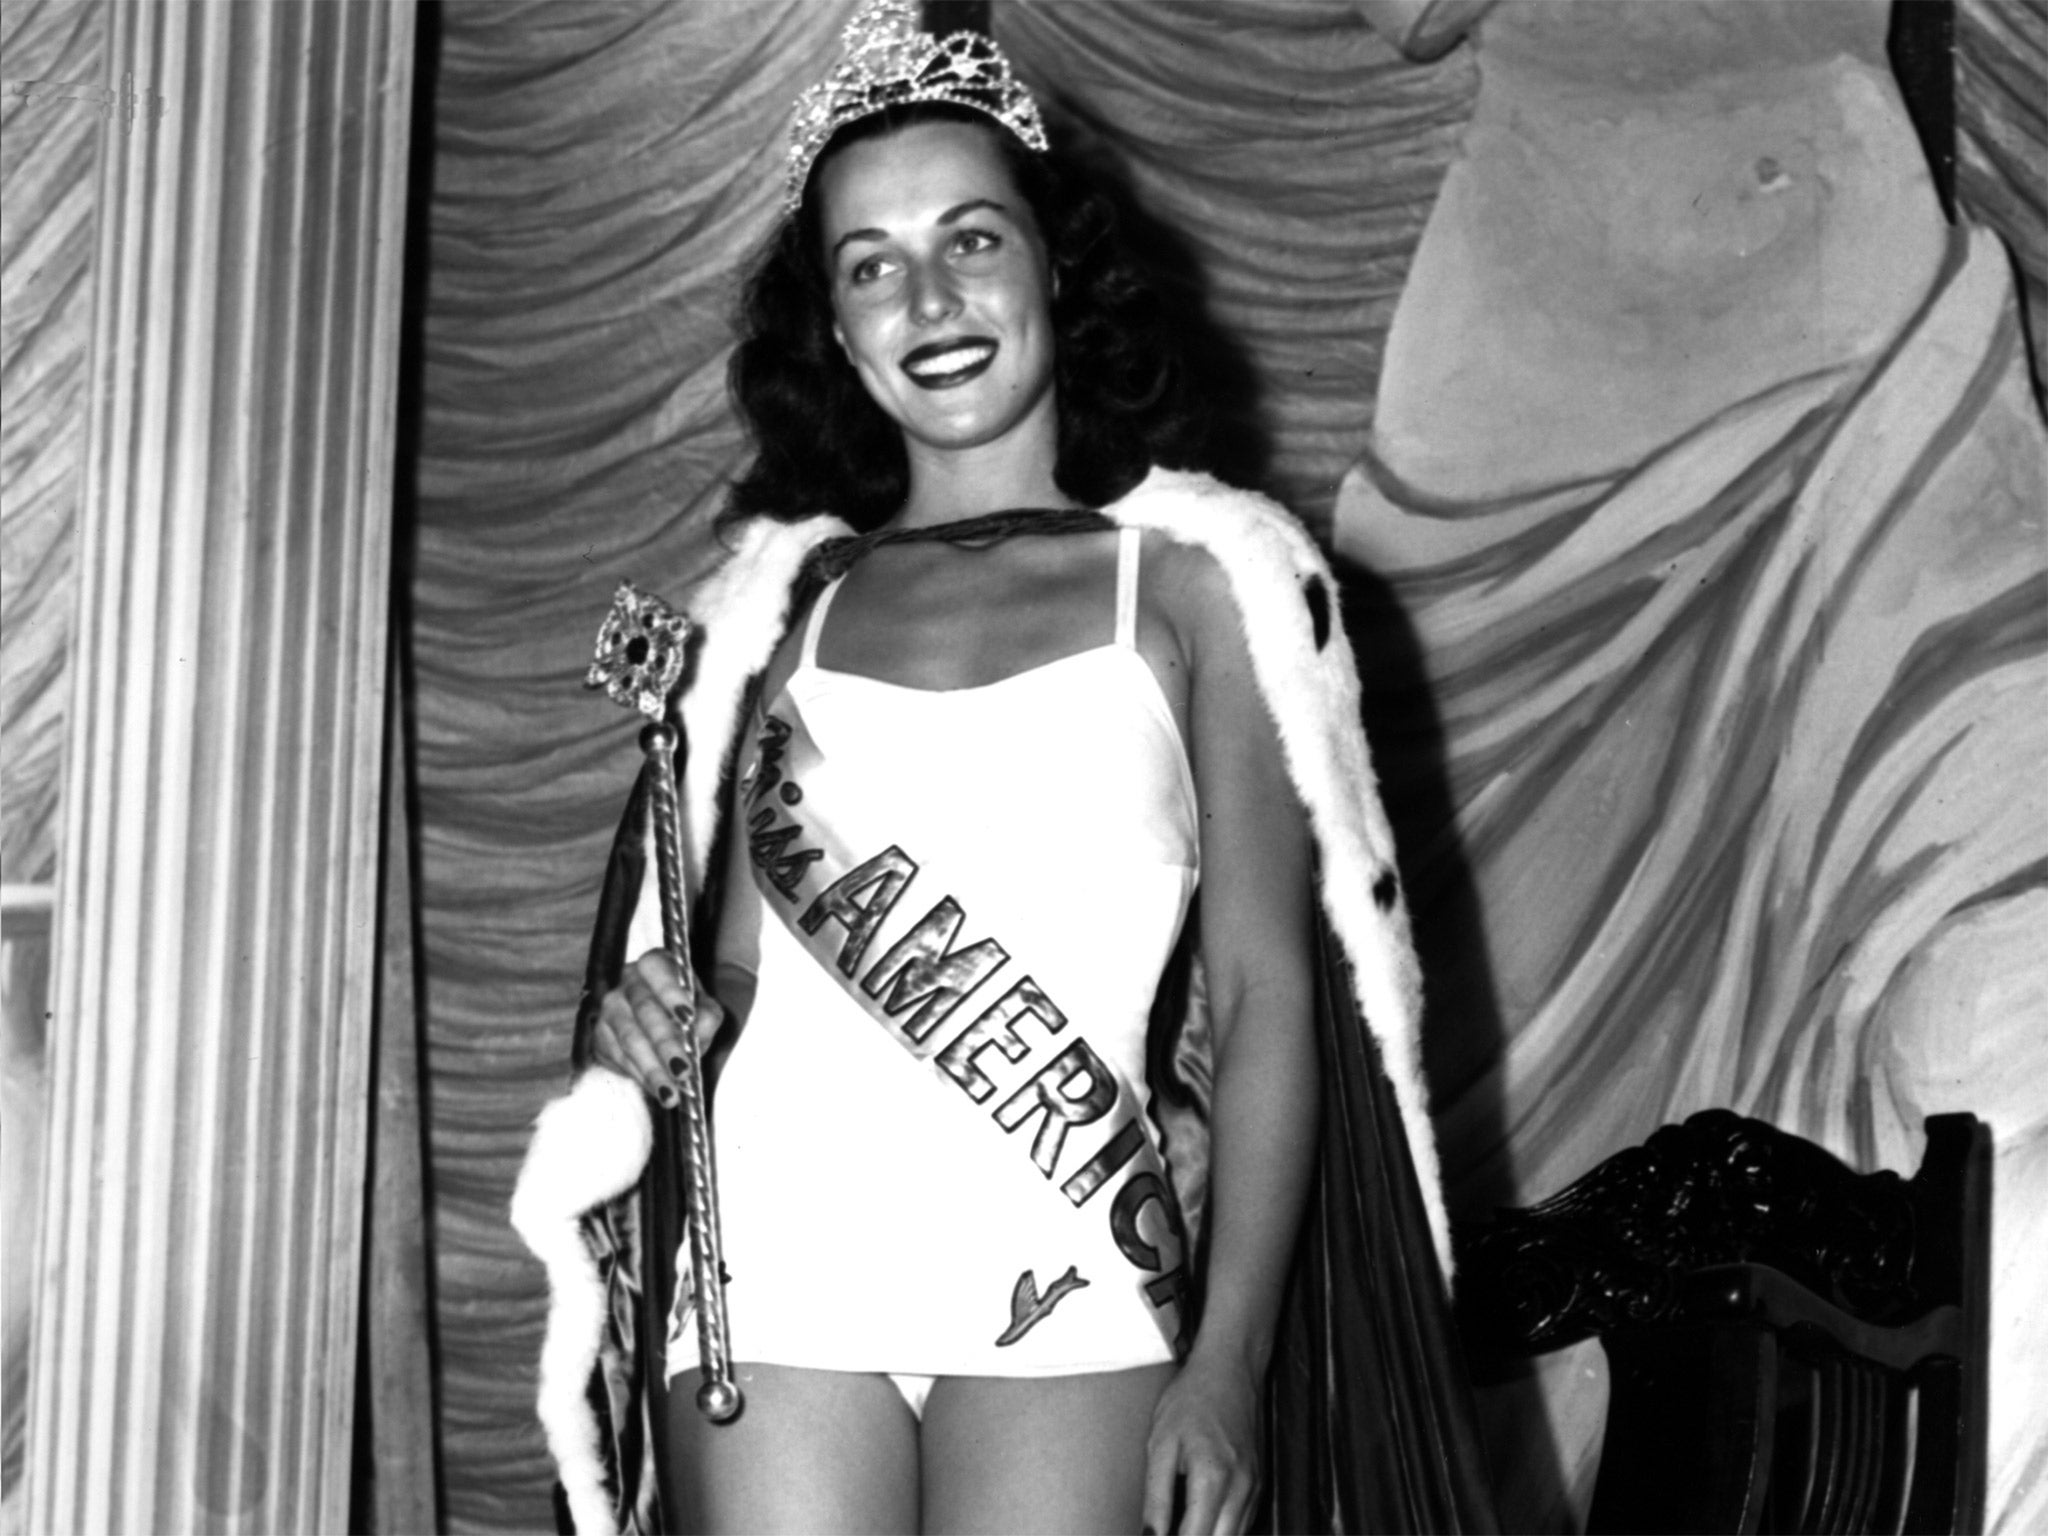 Myerson: organisers of Miss America asked her to change her name to something less Jewish, but she refused